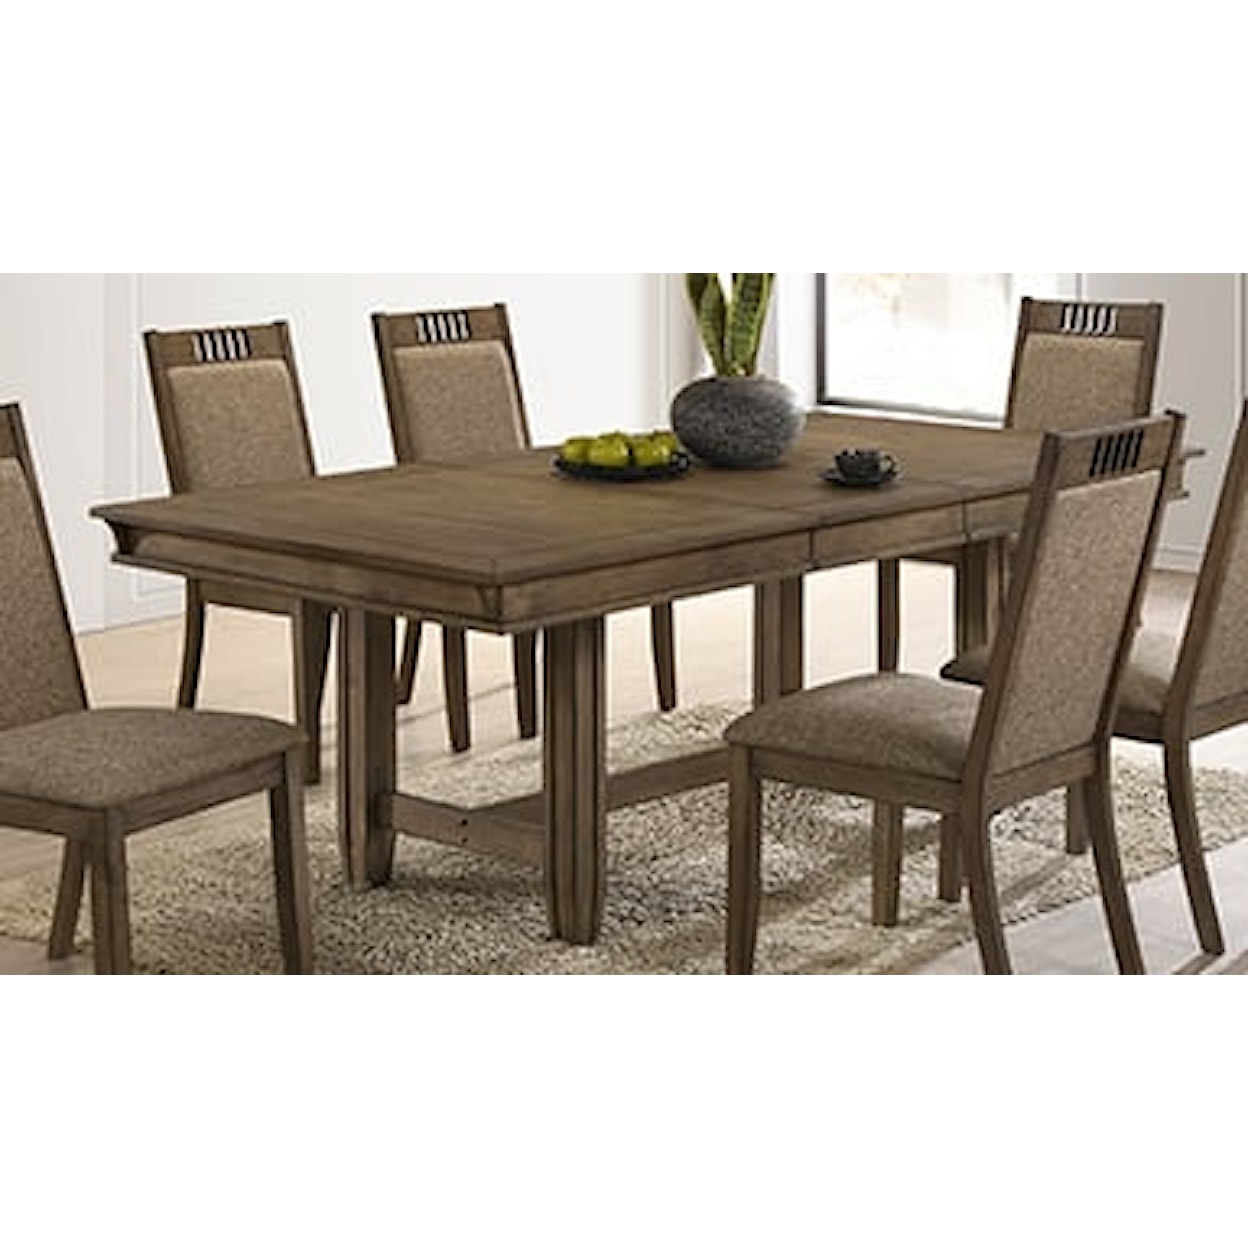 New Classic Furniture Portofino Dining Table with Leaf